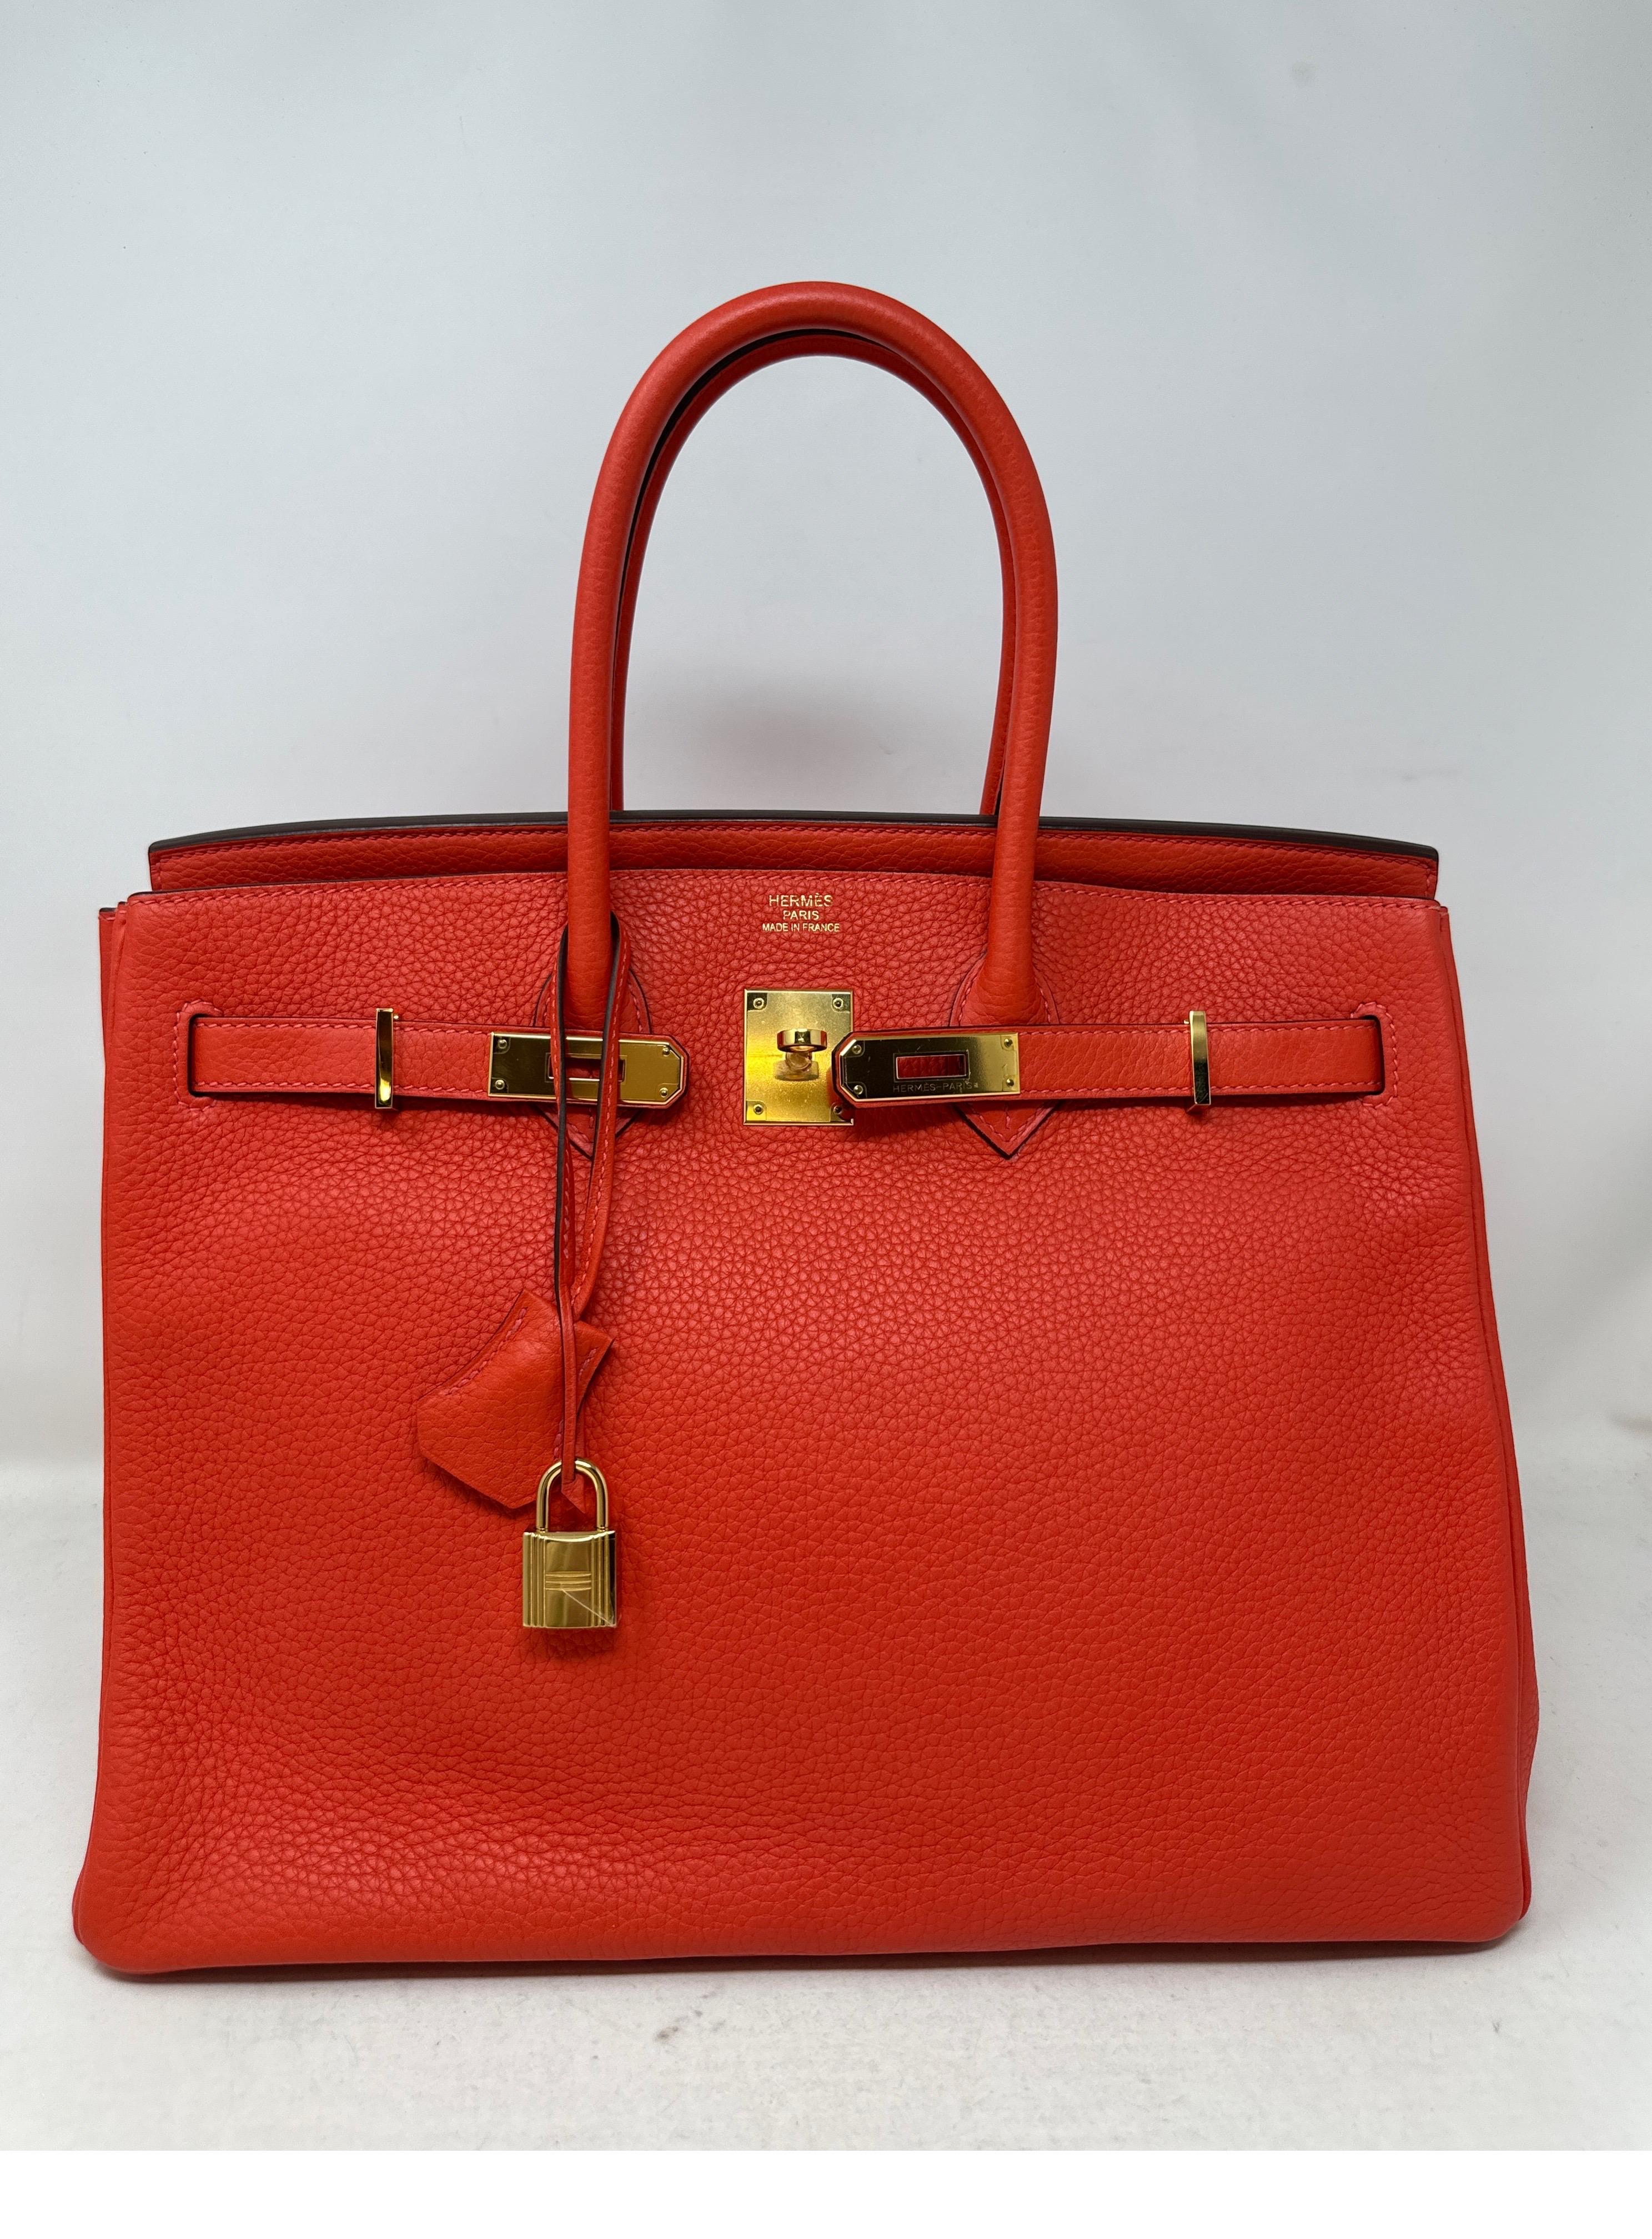 Hermes Capucine Birkin 35 Bag. Bright orange red color with gold hardware. Poppy color. Looks like new. Excellent condition. Plastic is still on the hardware. Big bags are coming back. Don't miss out on a great deal. Interior clean. Includes